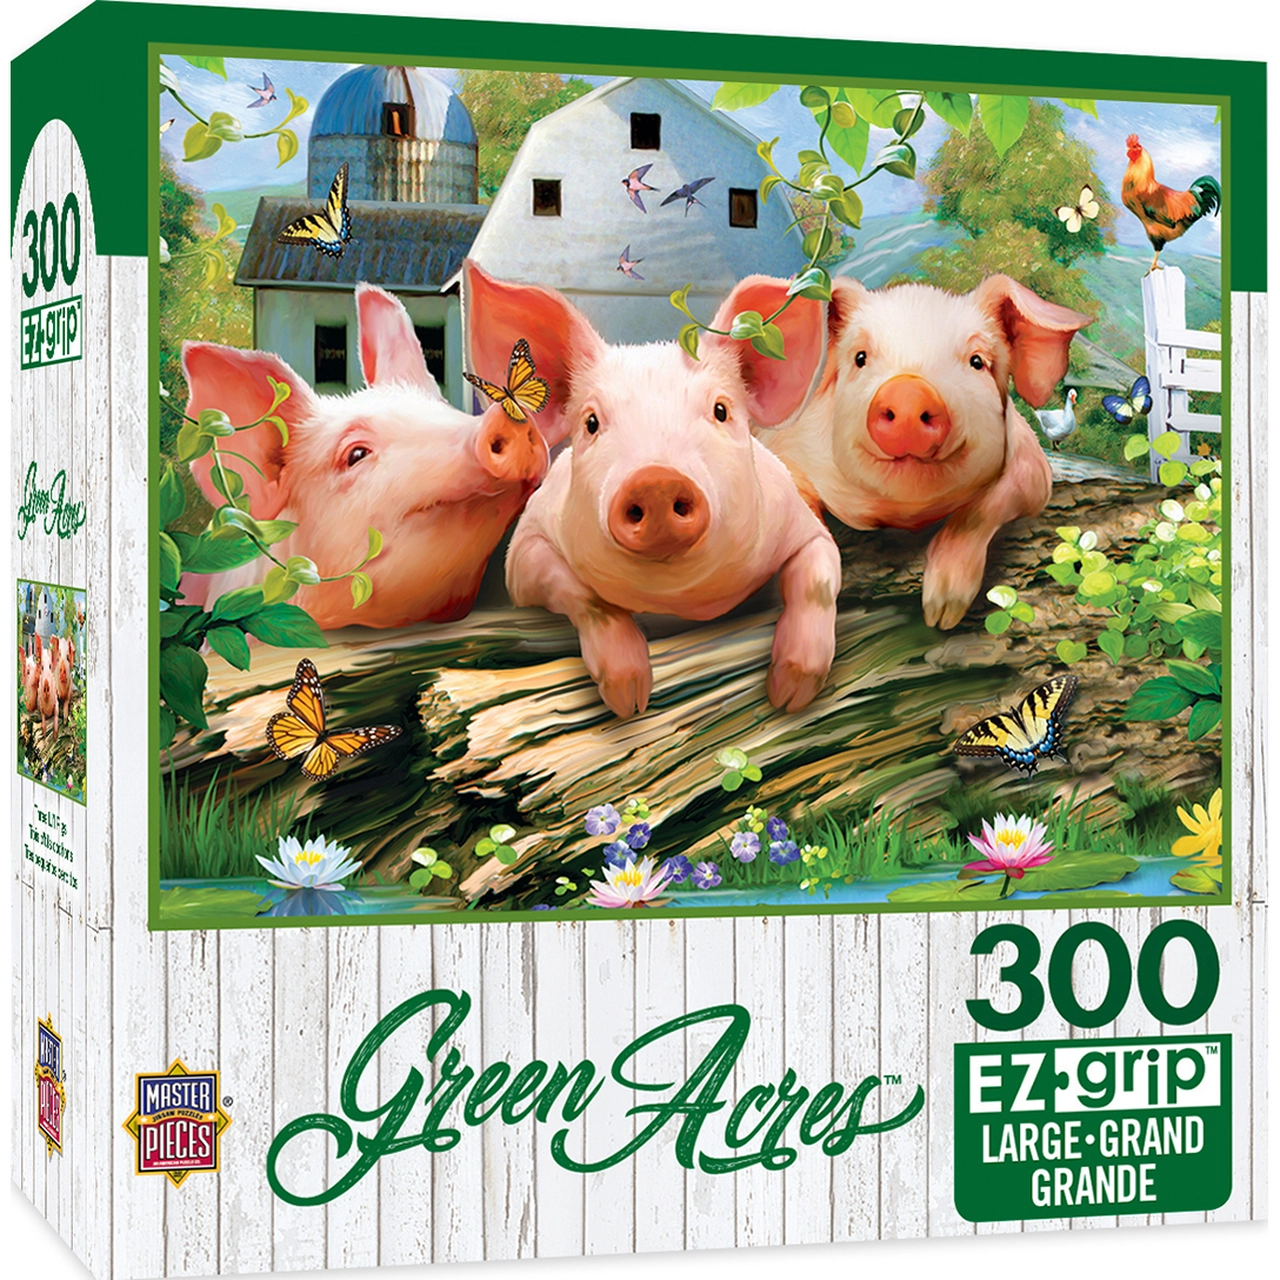 MasterPieces-Green Acres - Three 'Lil Pigs - 300 Piece EzGrip Puzzle-31817-Legacy Toys